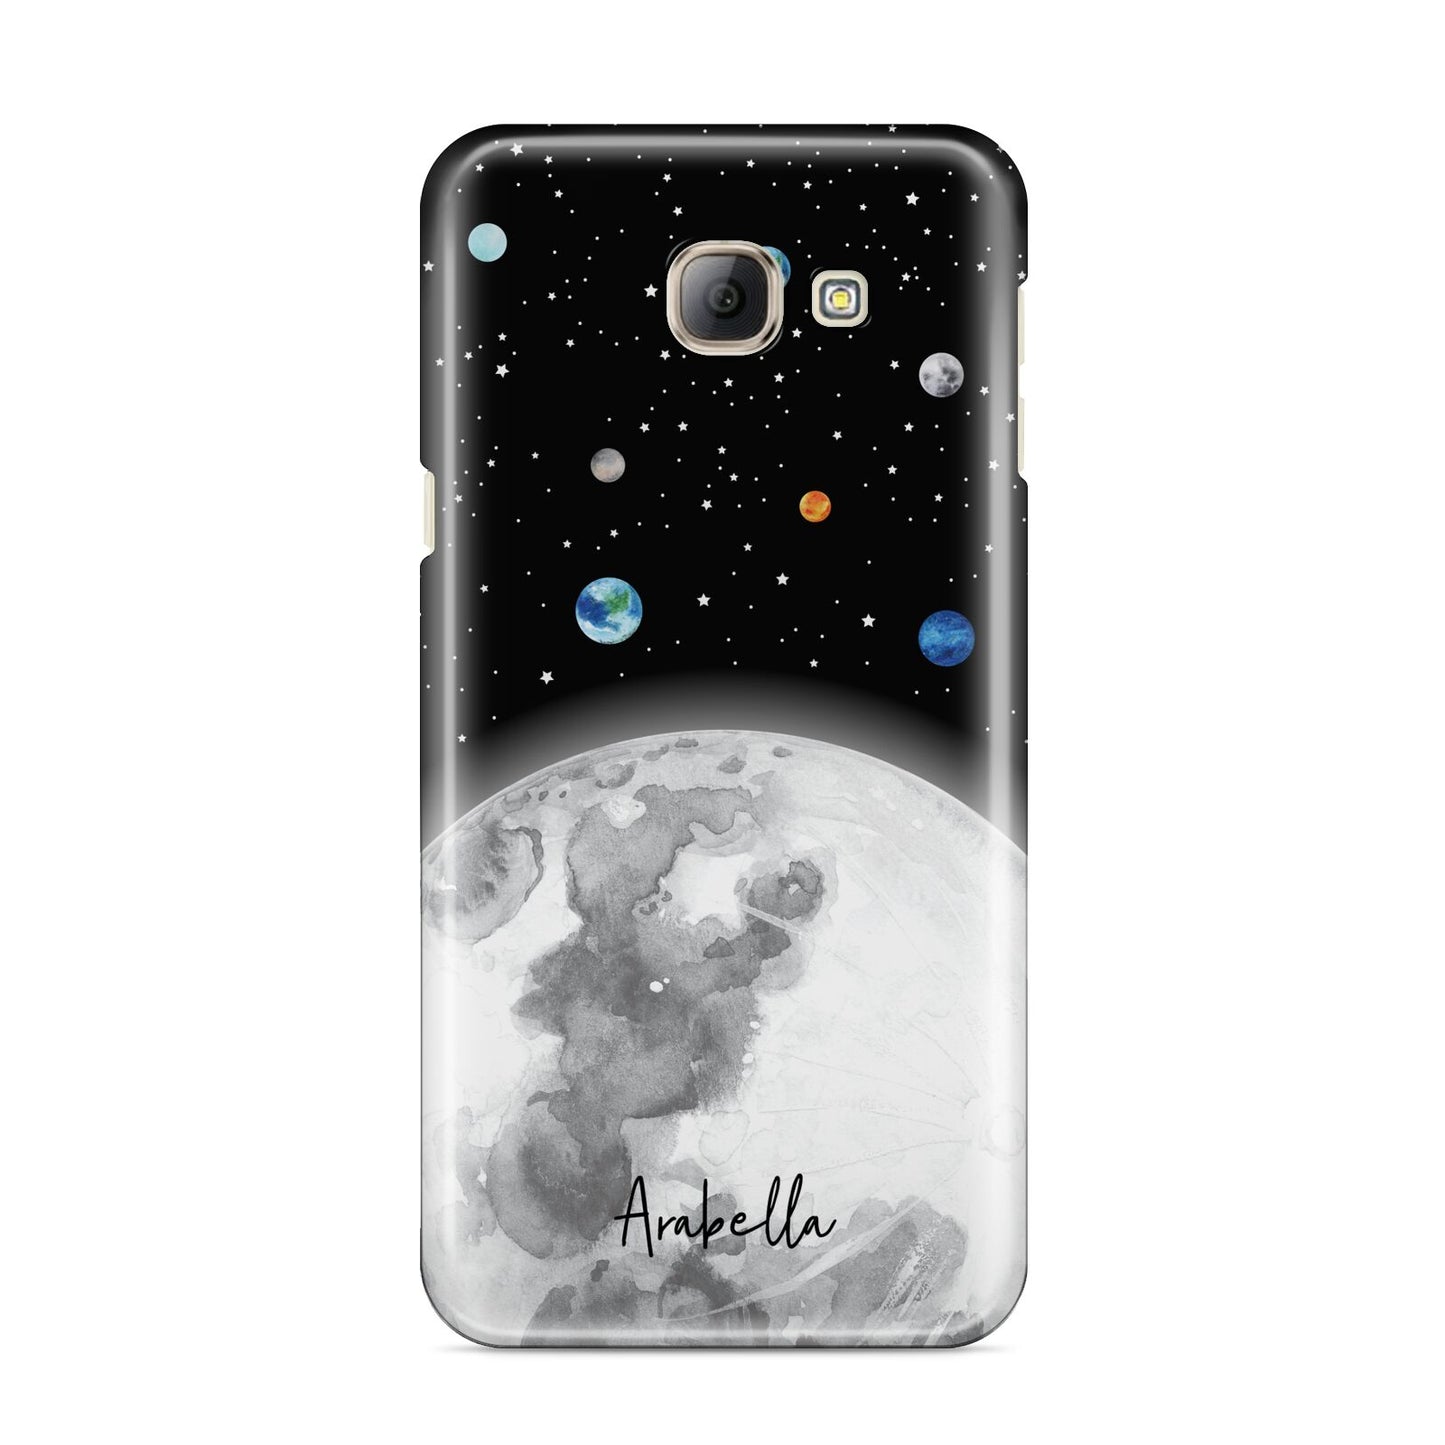 Watercolour Close up Moon with Name Samsung Galaxy A8 2016 Case